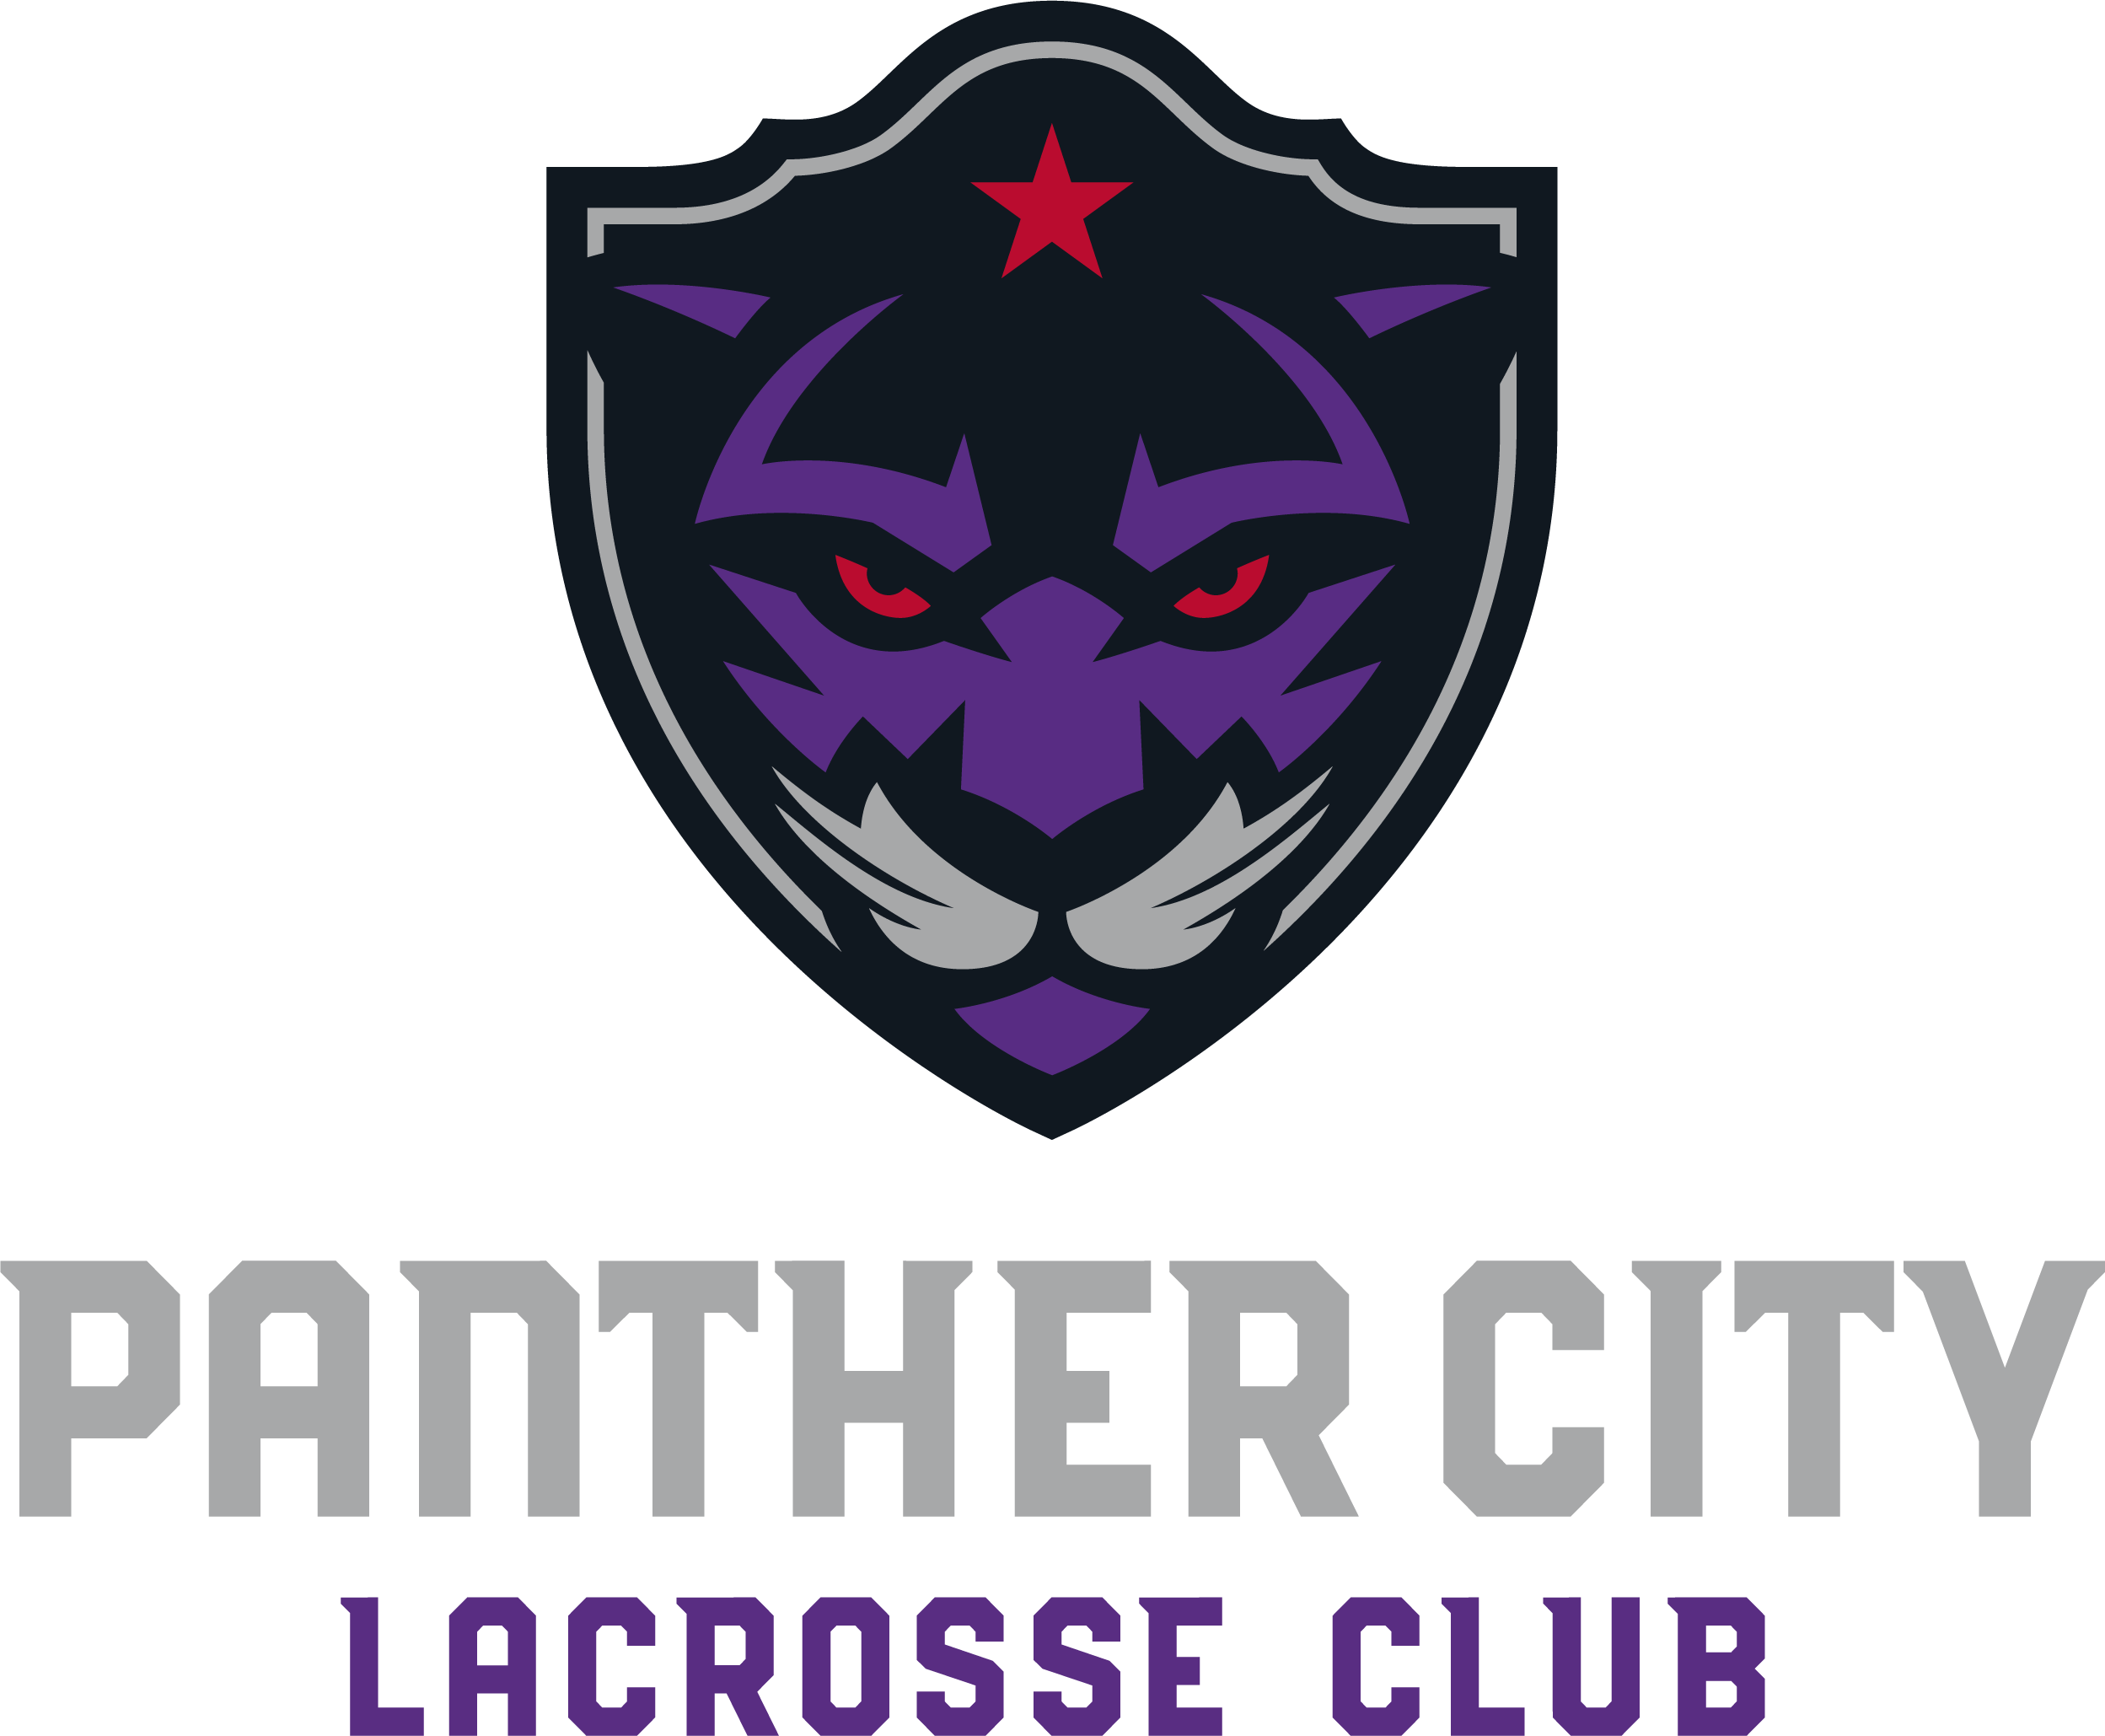 Panther City Lacrosse Club Releases Three Players